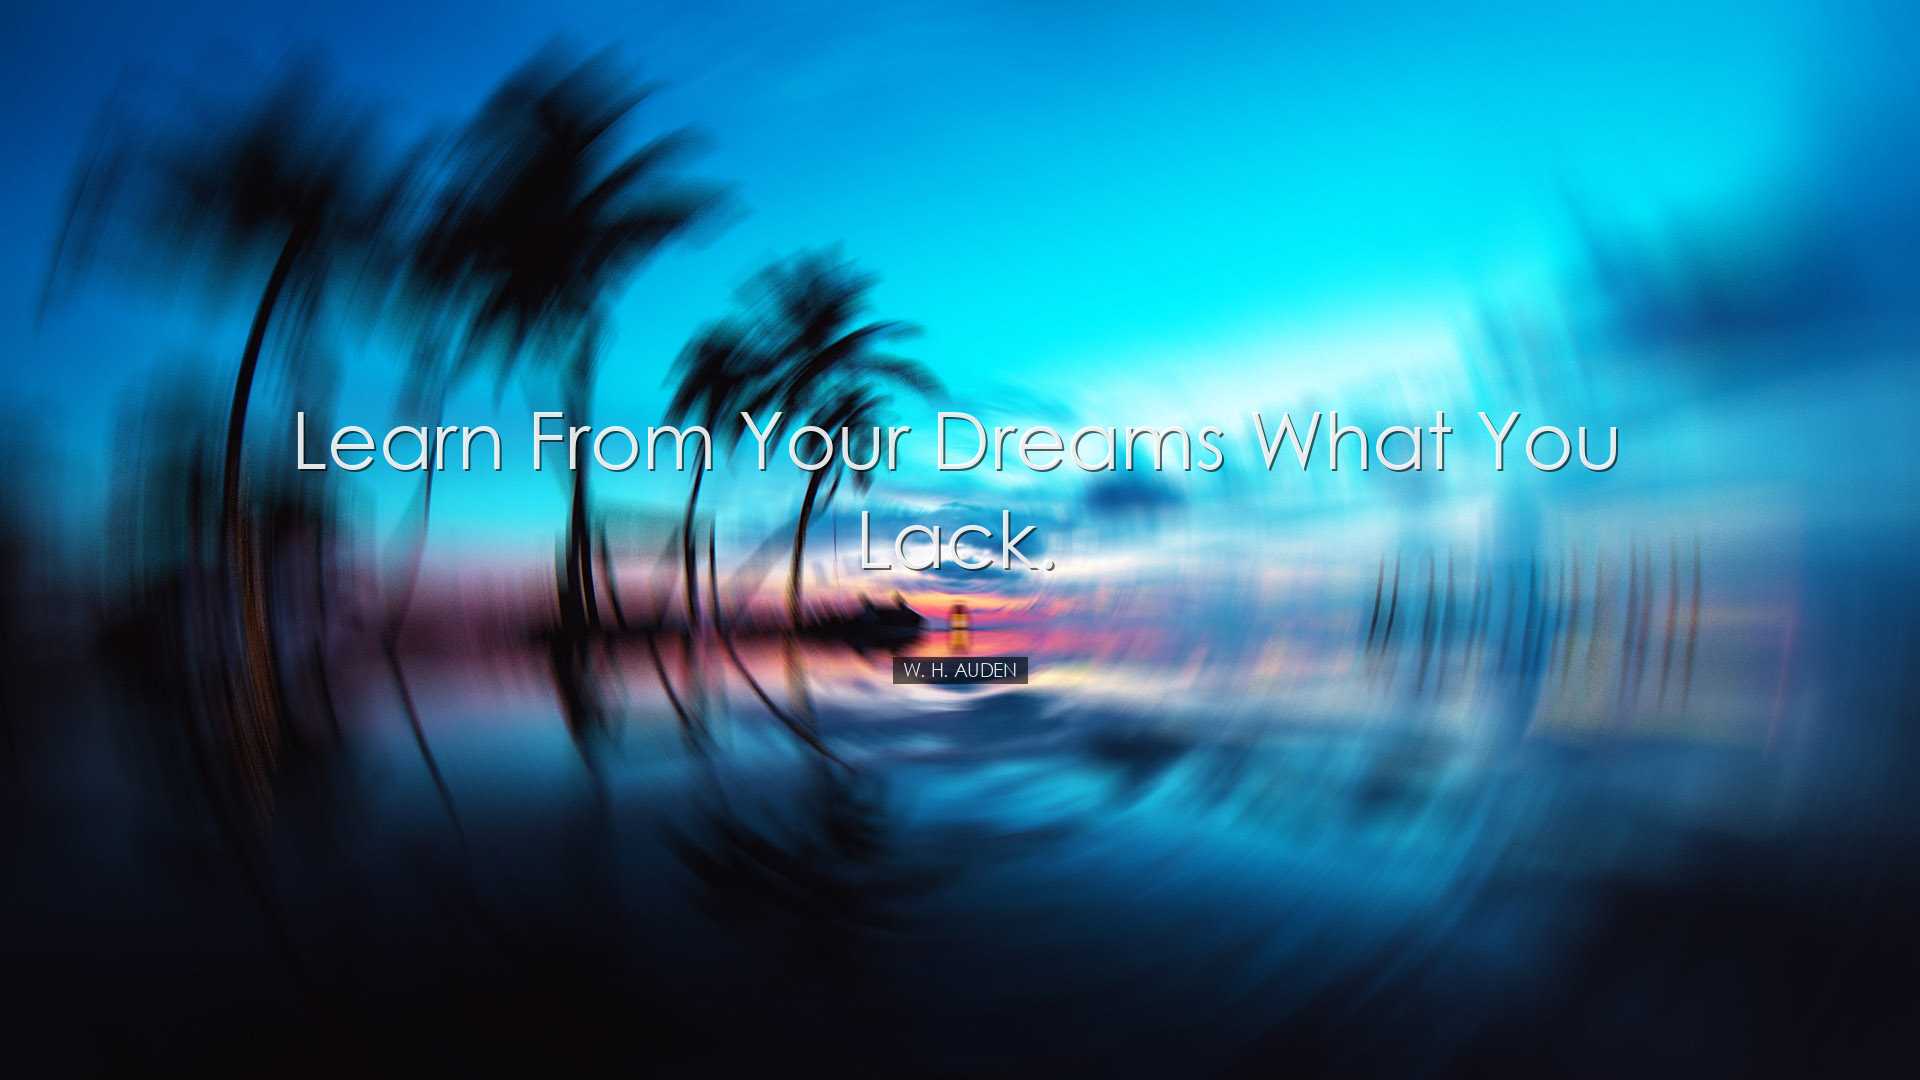 Learn from your dreams what you lack. - W. H. Auden